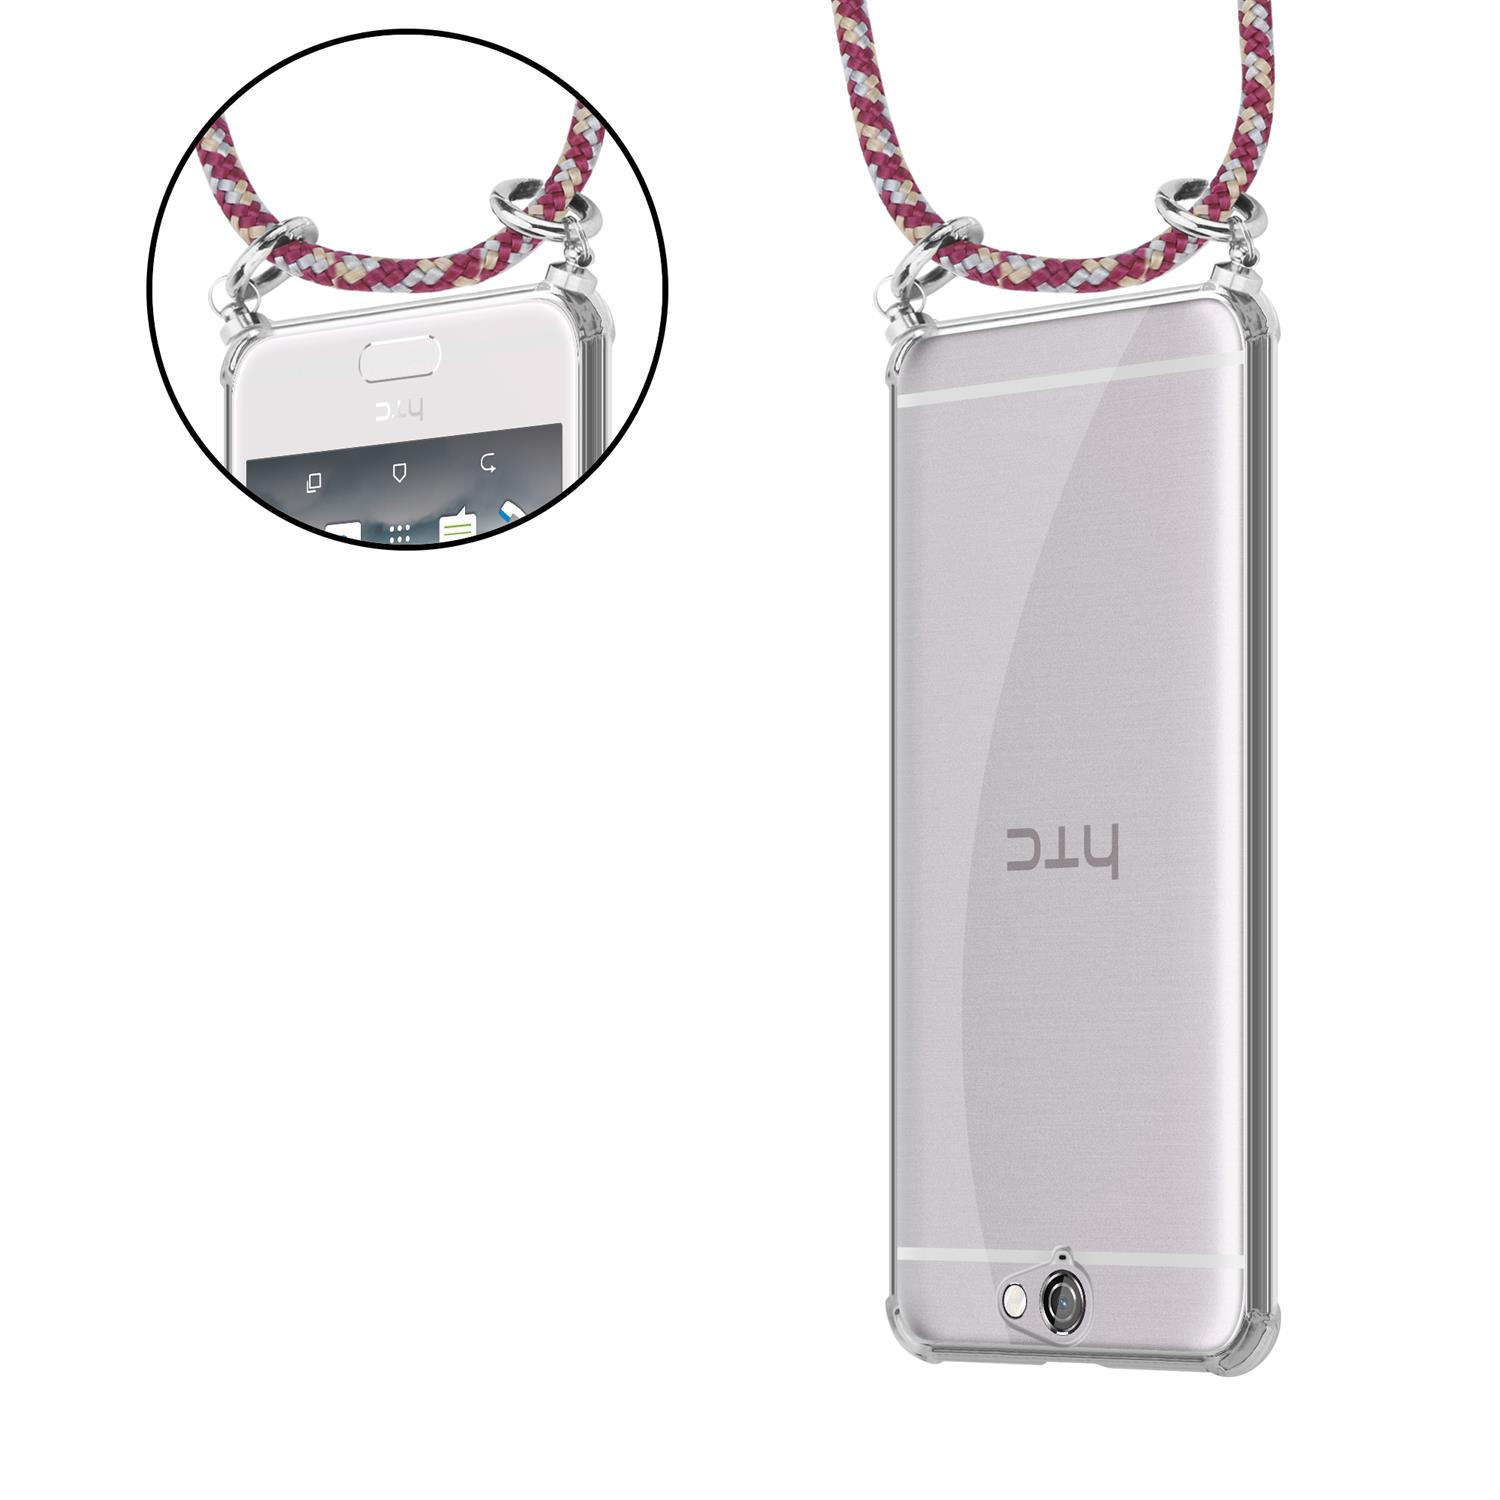 Kordel ONE Hülle, Silber Kette abnehmbarer HTC, mit CADORABO und Backcover, A9, Ringen, Handy WEIß ROT GELB Band